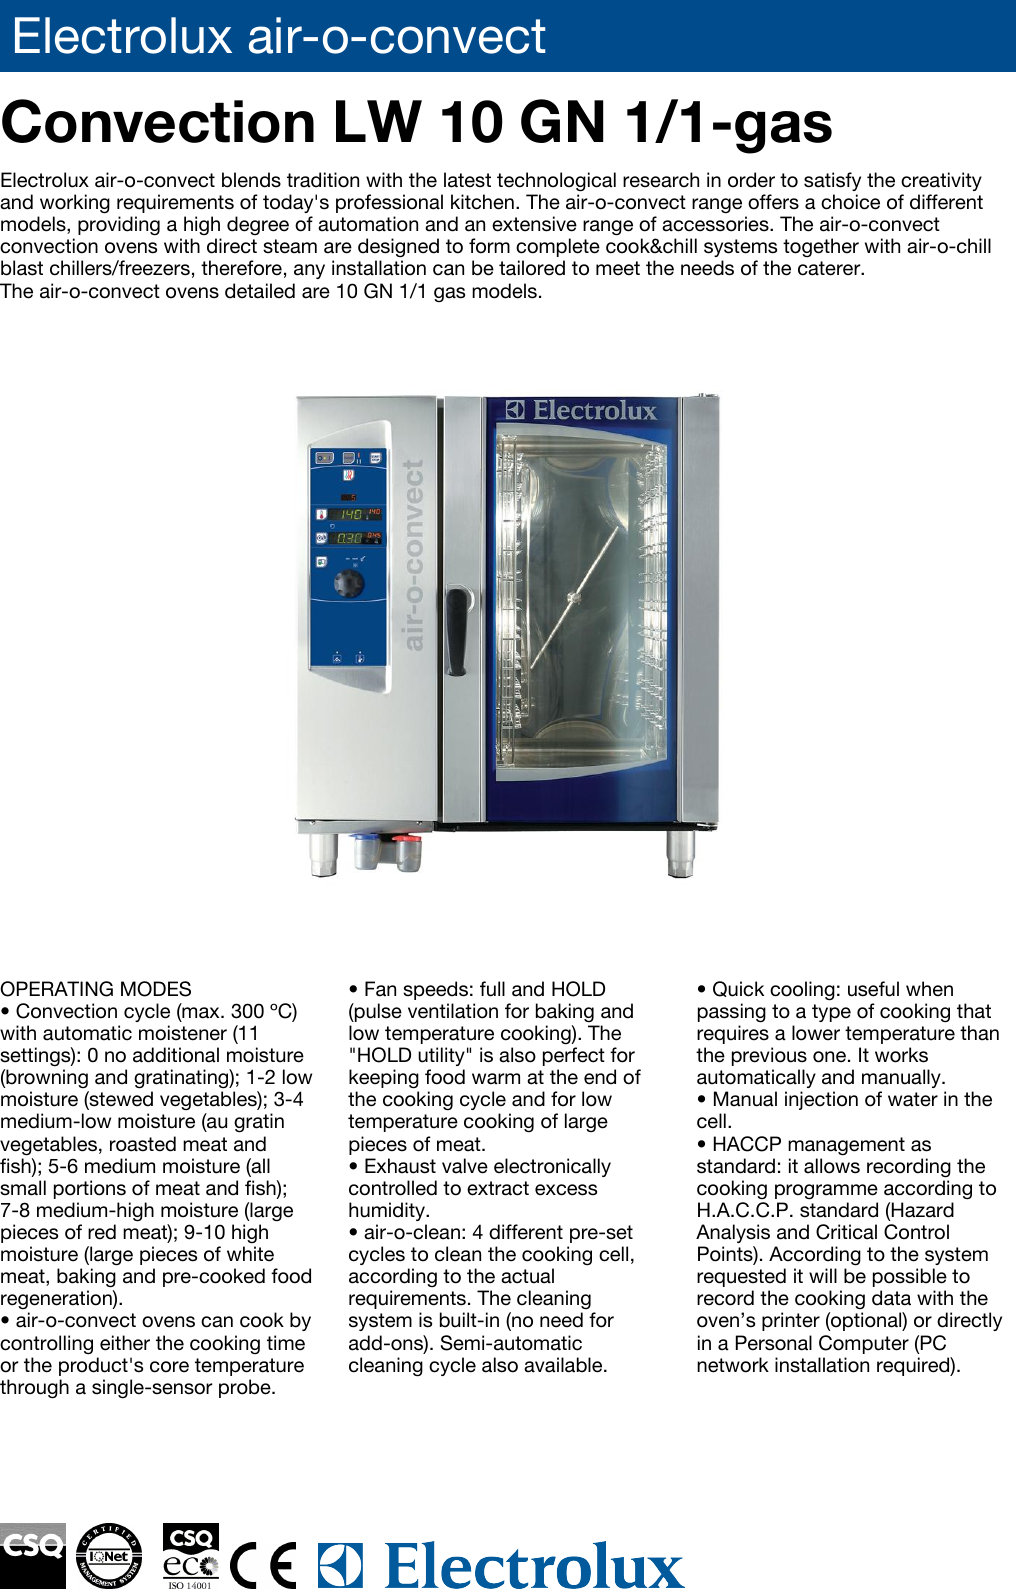 Page 1 of 4 - Electrolux Electrolux-Air-O-Convect-269502-Users-Manual- Air-o-convect  Electrolux-air-o-convect-269502-users-manual